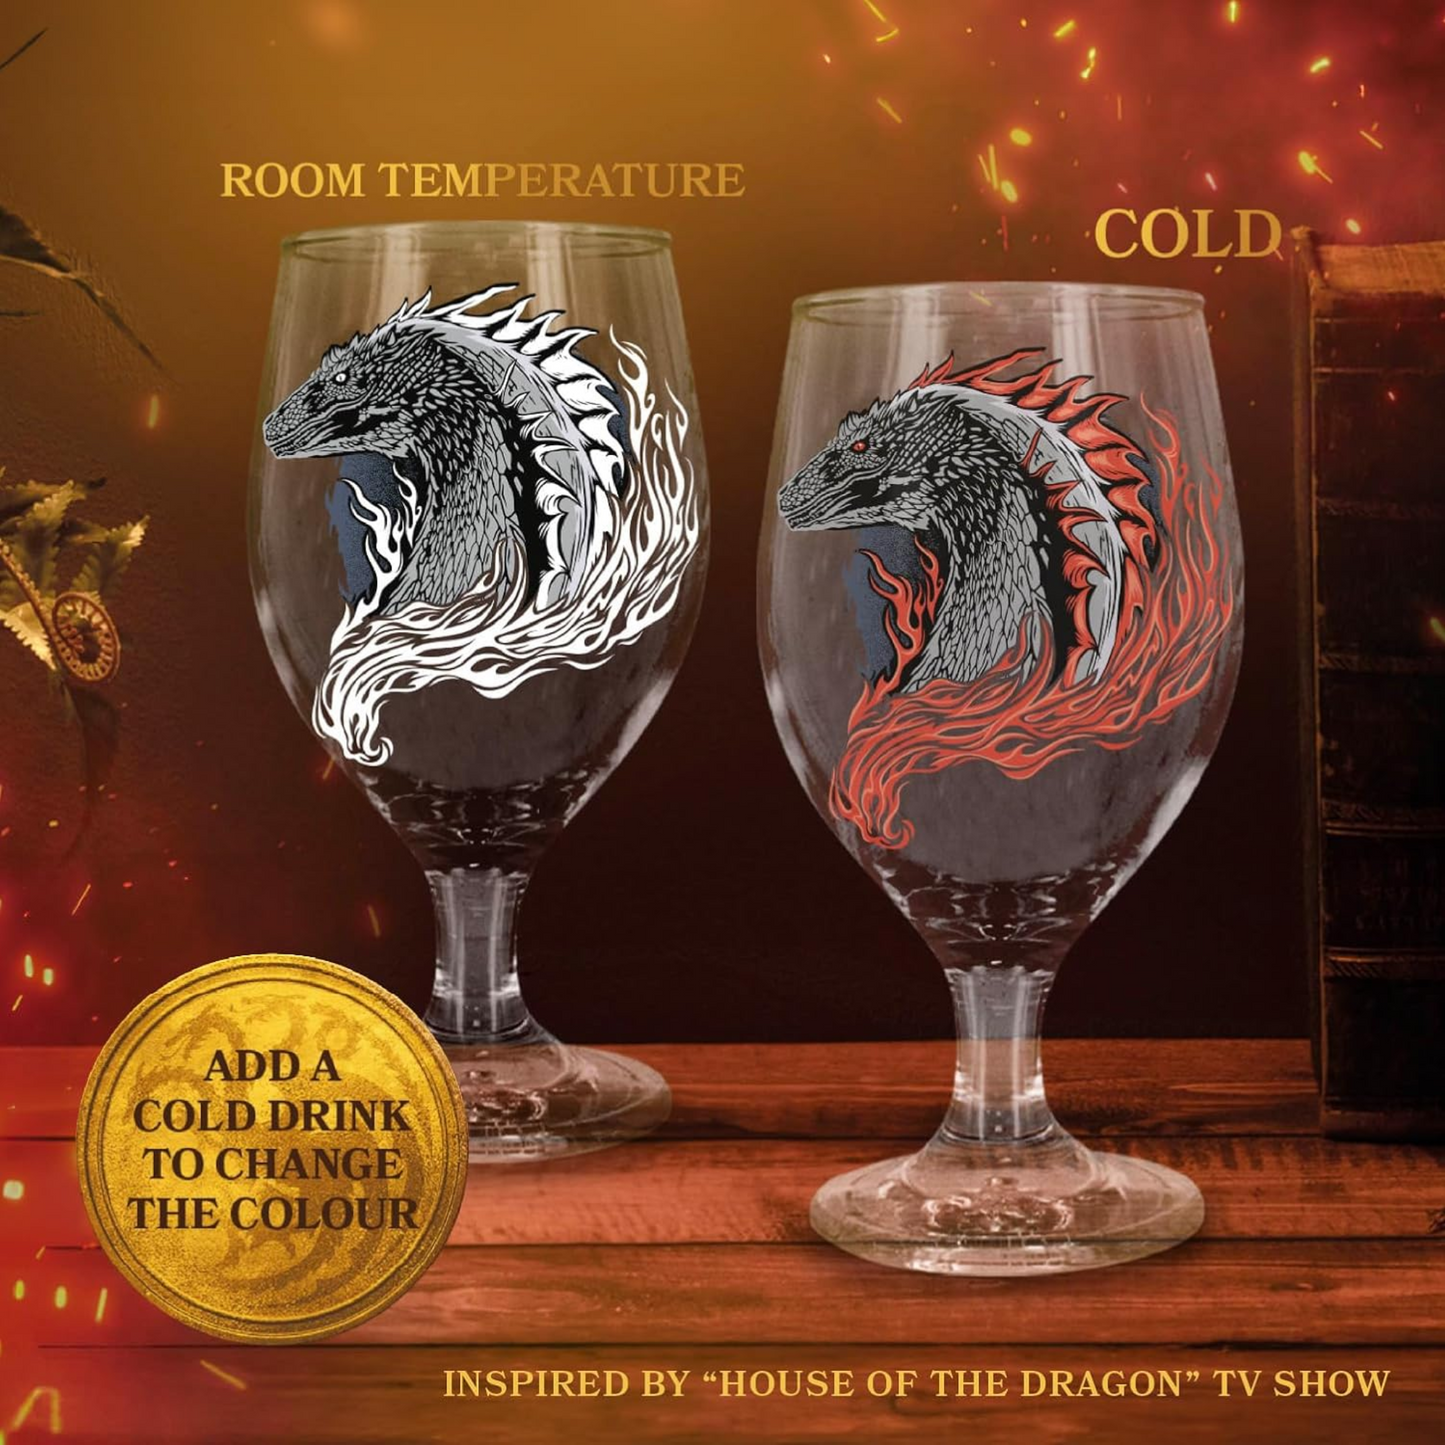 House of the dragon colour changing goblet - Paladone